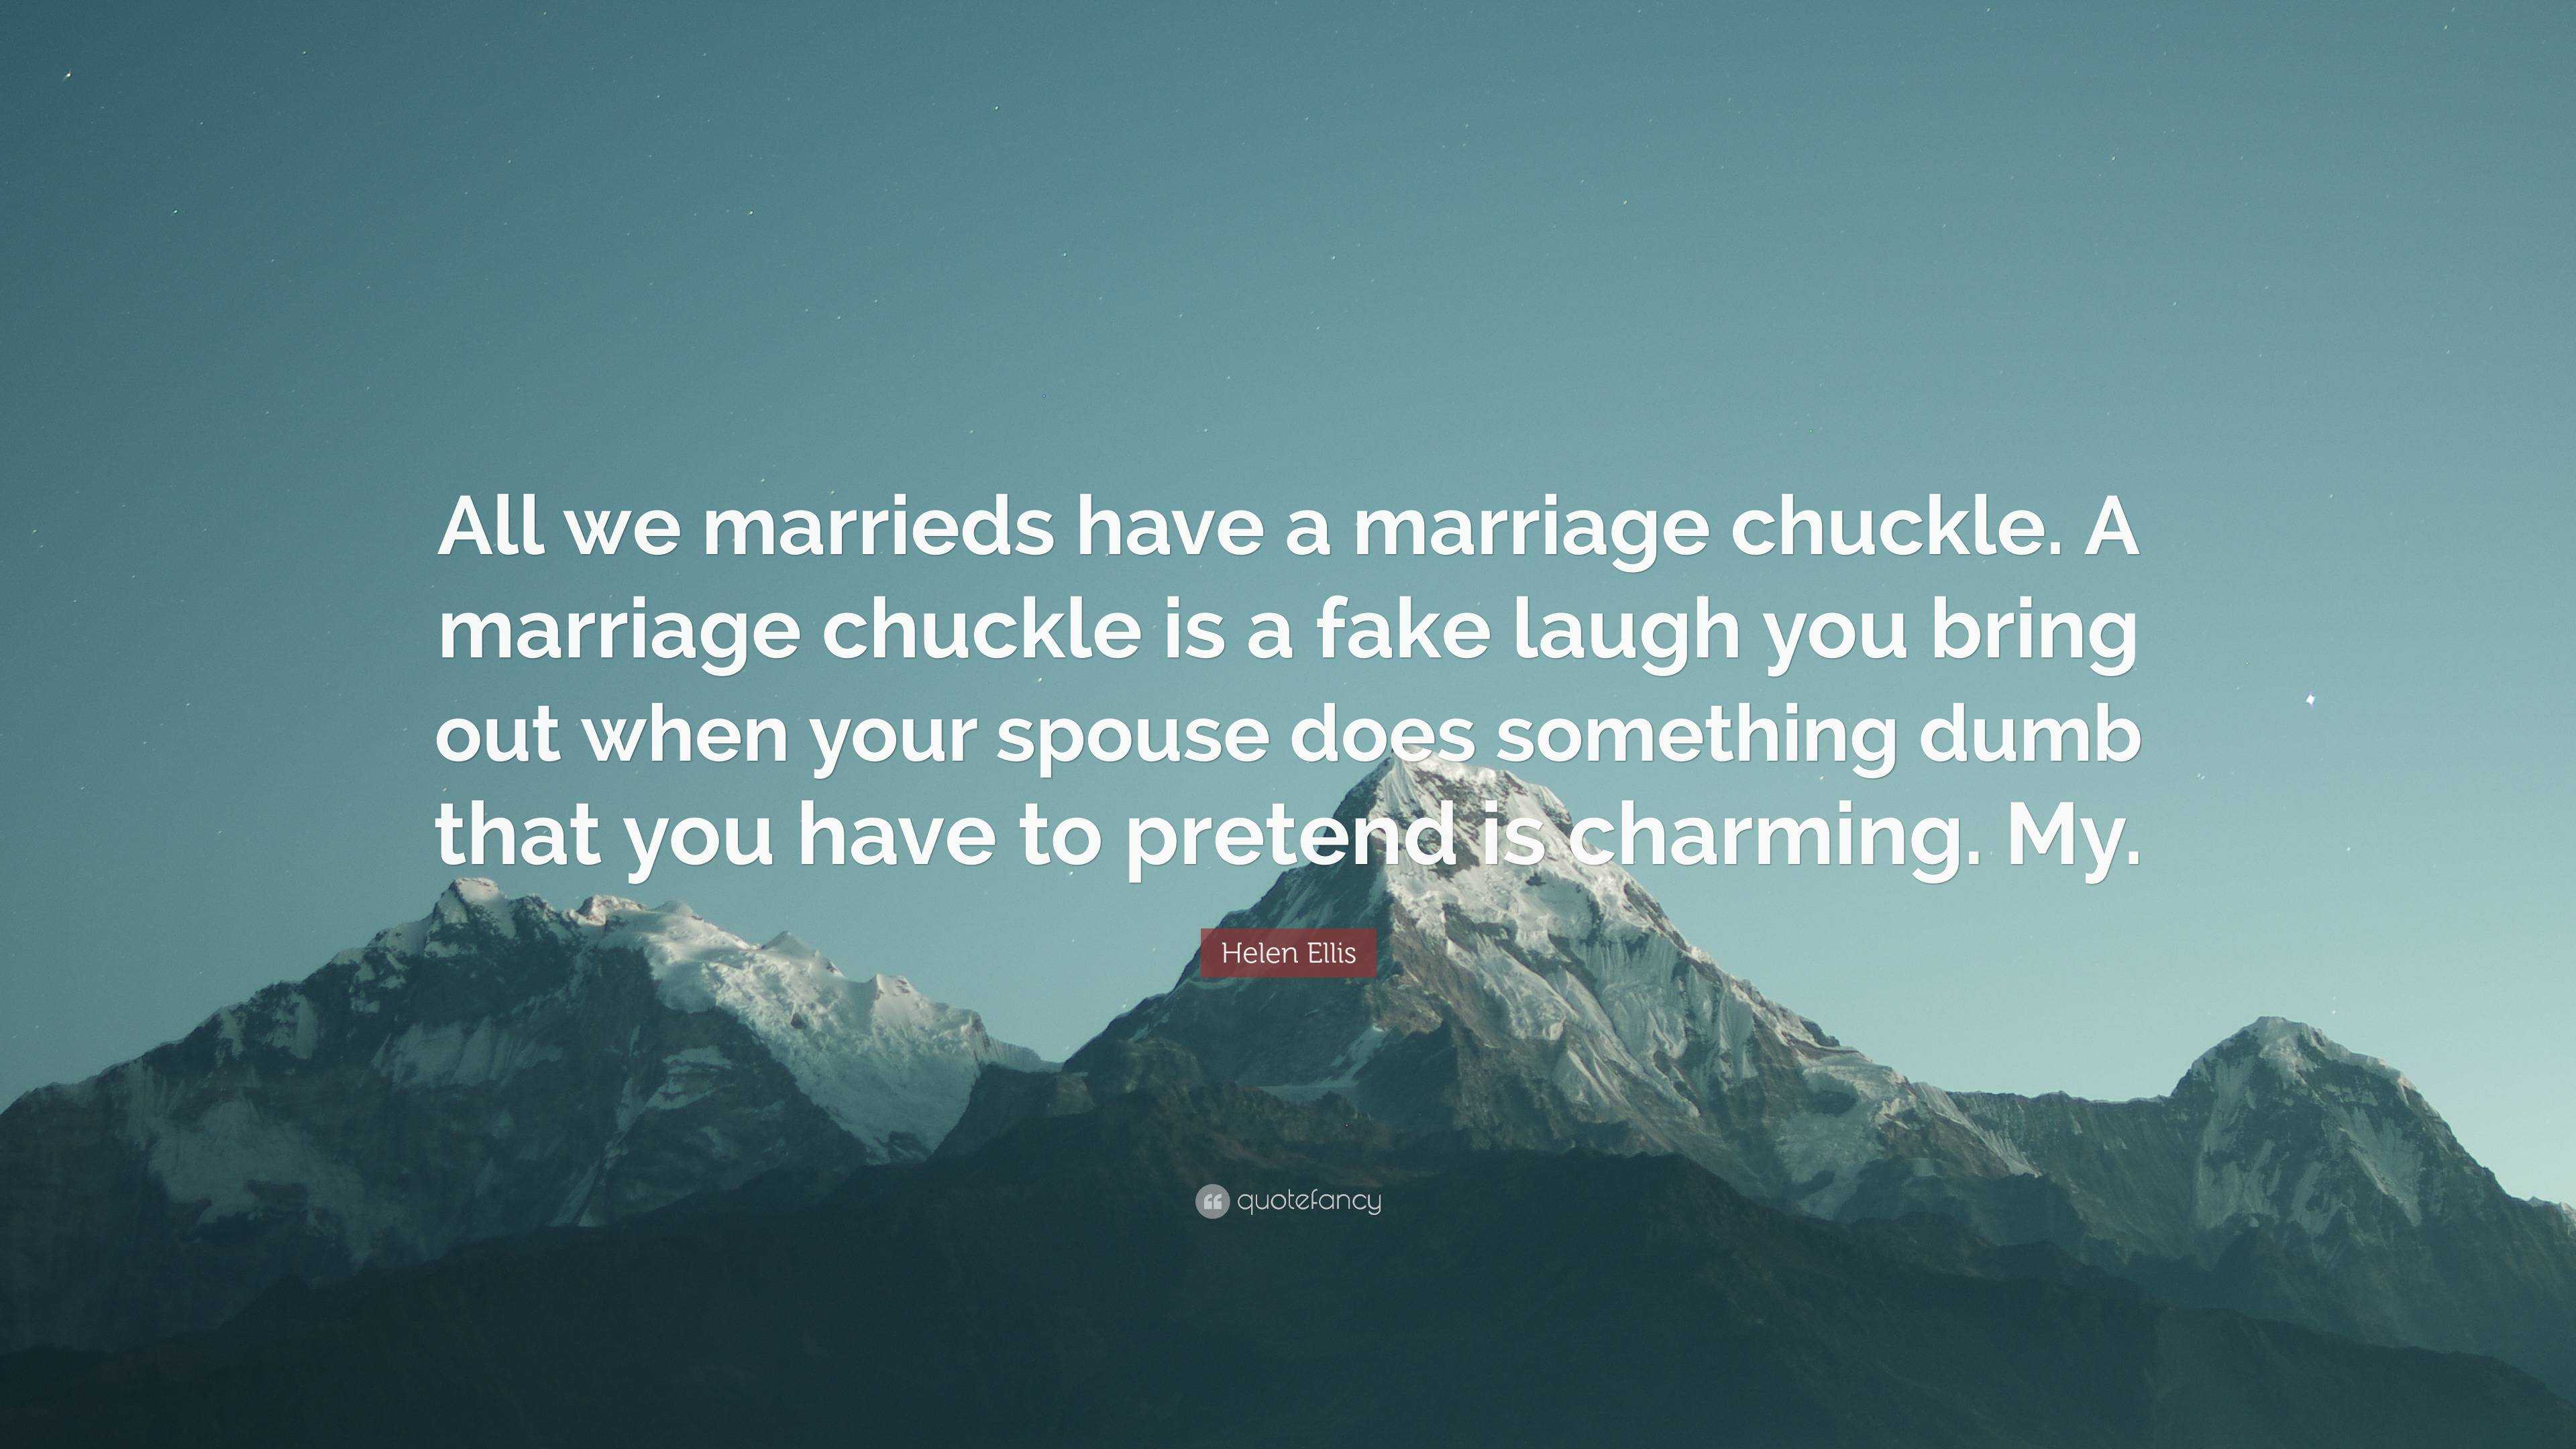 Helen Ellis Quote: “All we marrieds have a marriage chuckle. A marriage  chuckle is a fake laugh you bring out when your spouse does somethin”